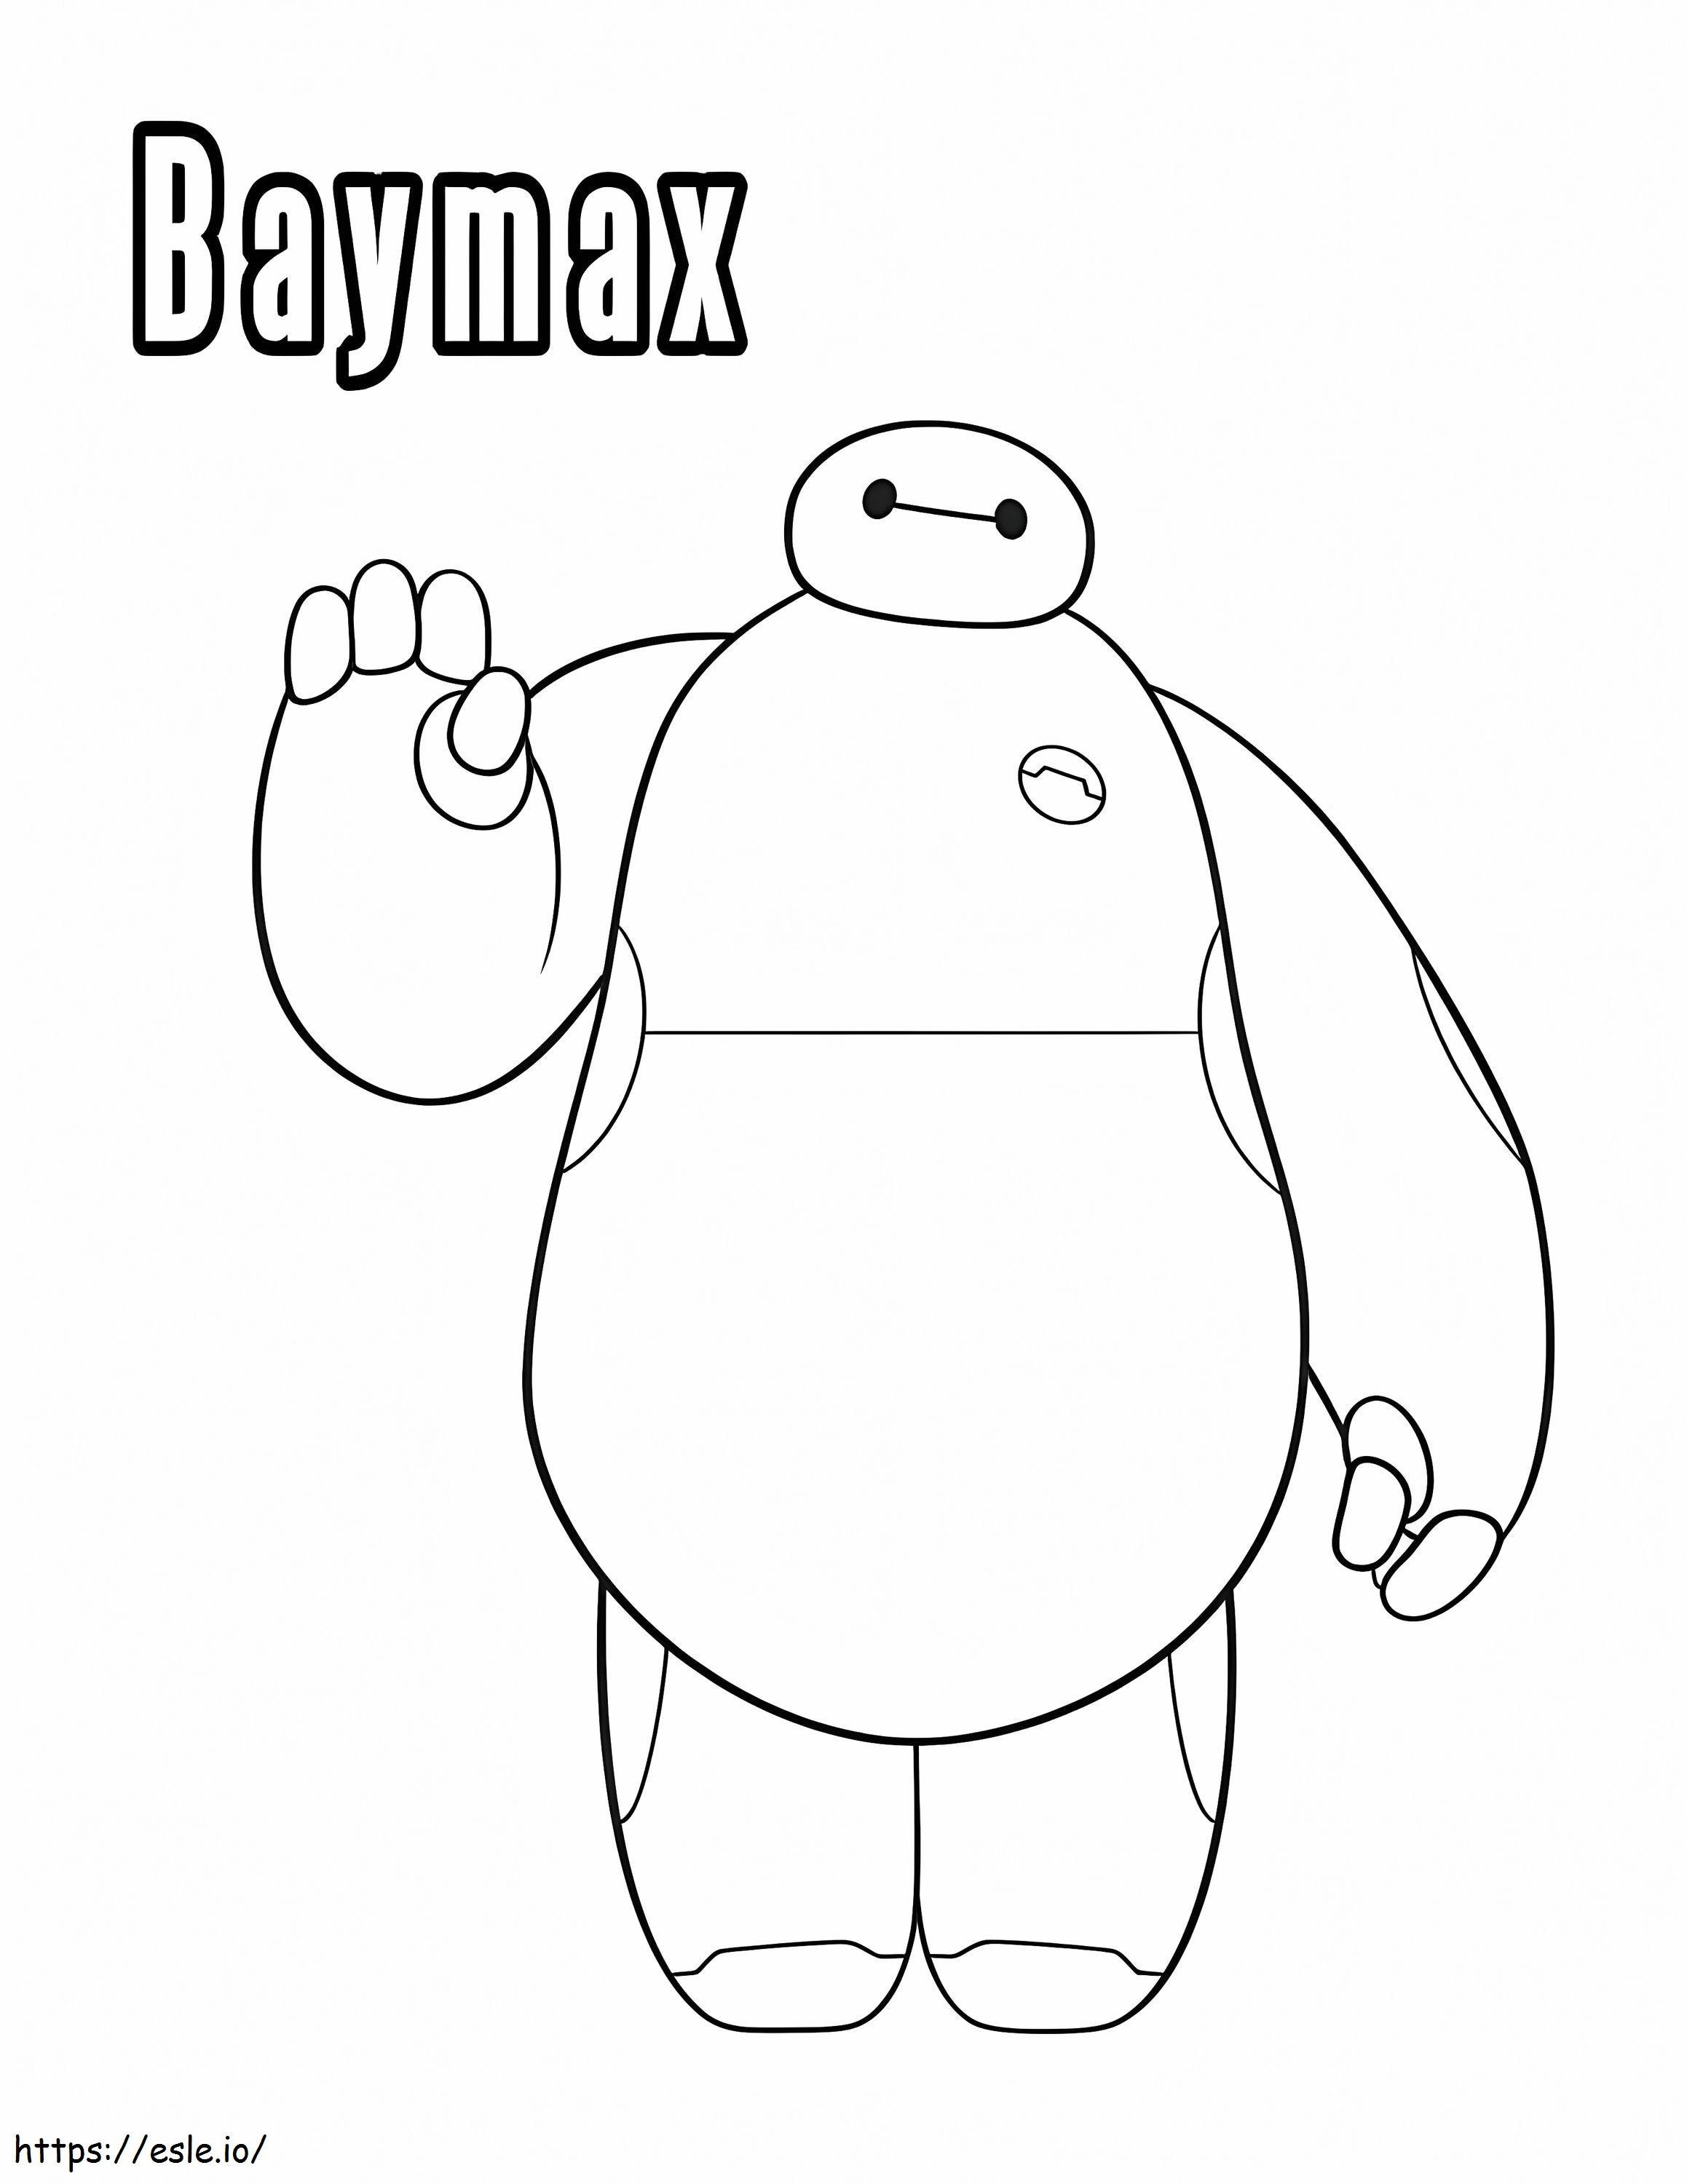 Baymax Is Waving Hand coloring page